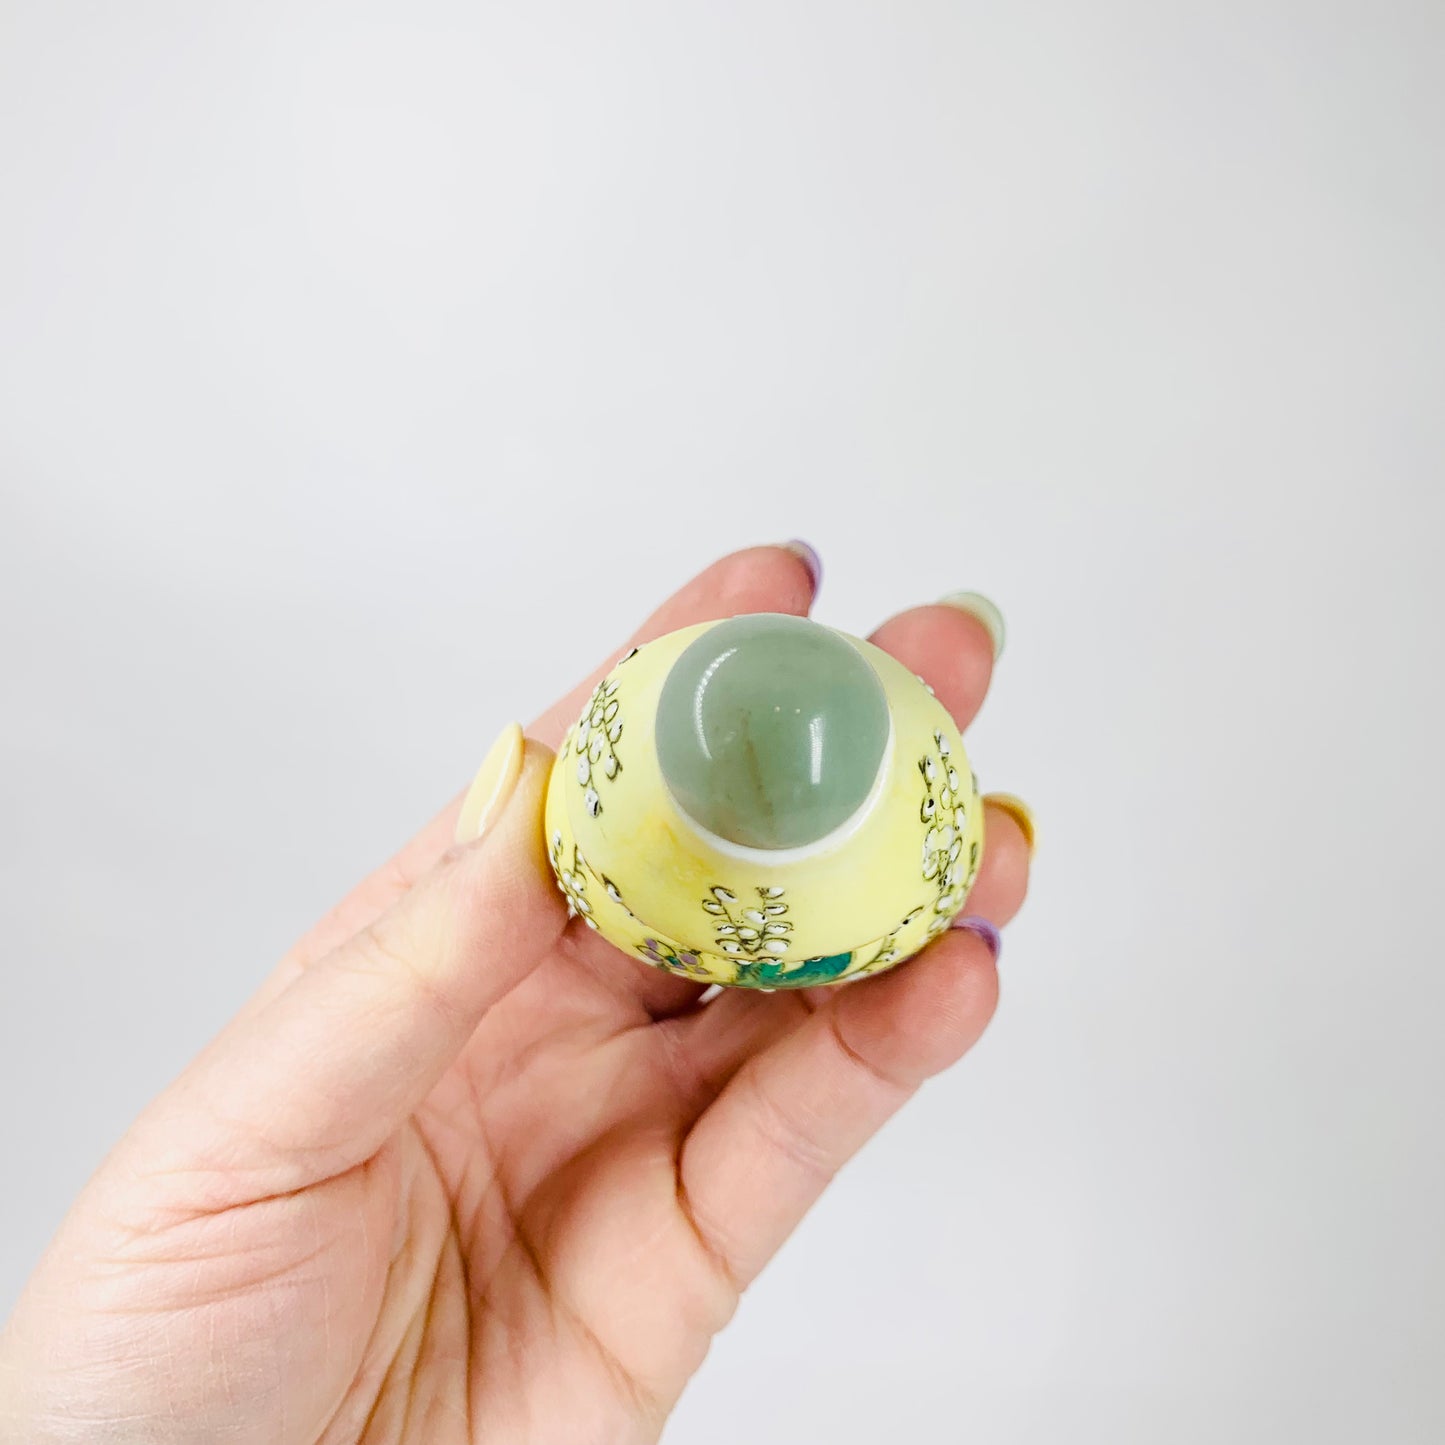 Antique Chinese hand painted yellow porcelain snuff bottle with jade stopper